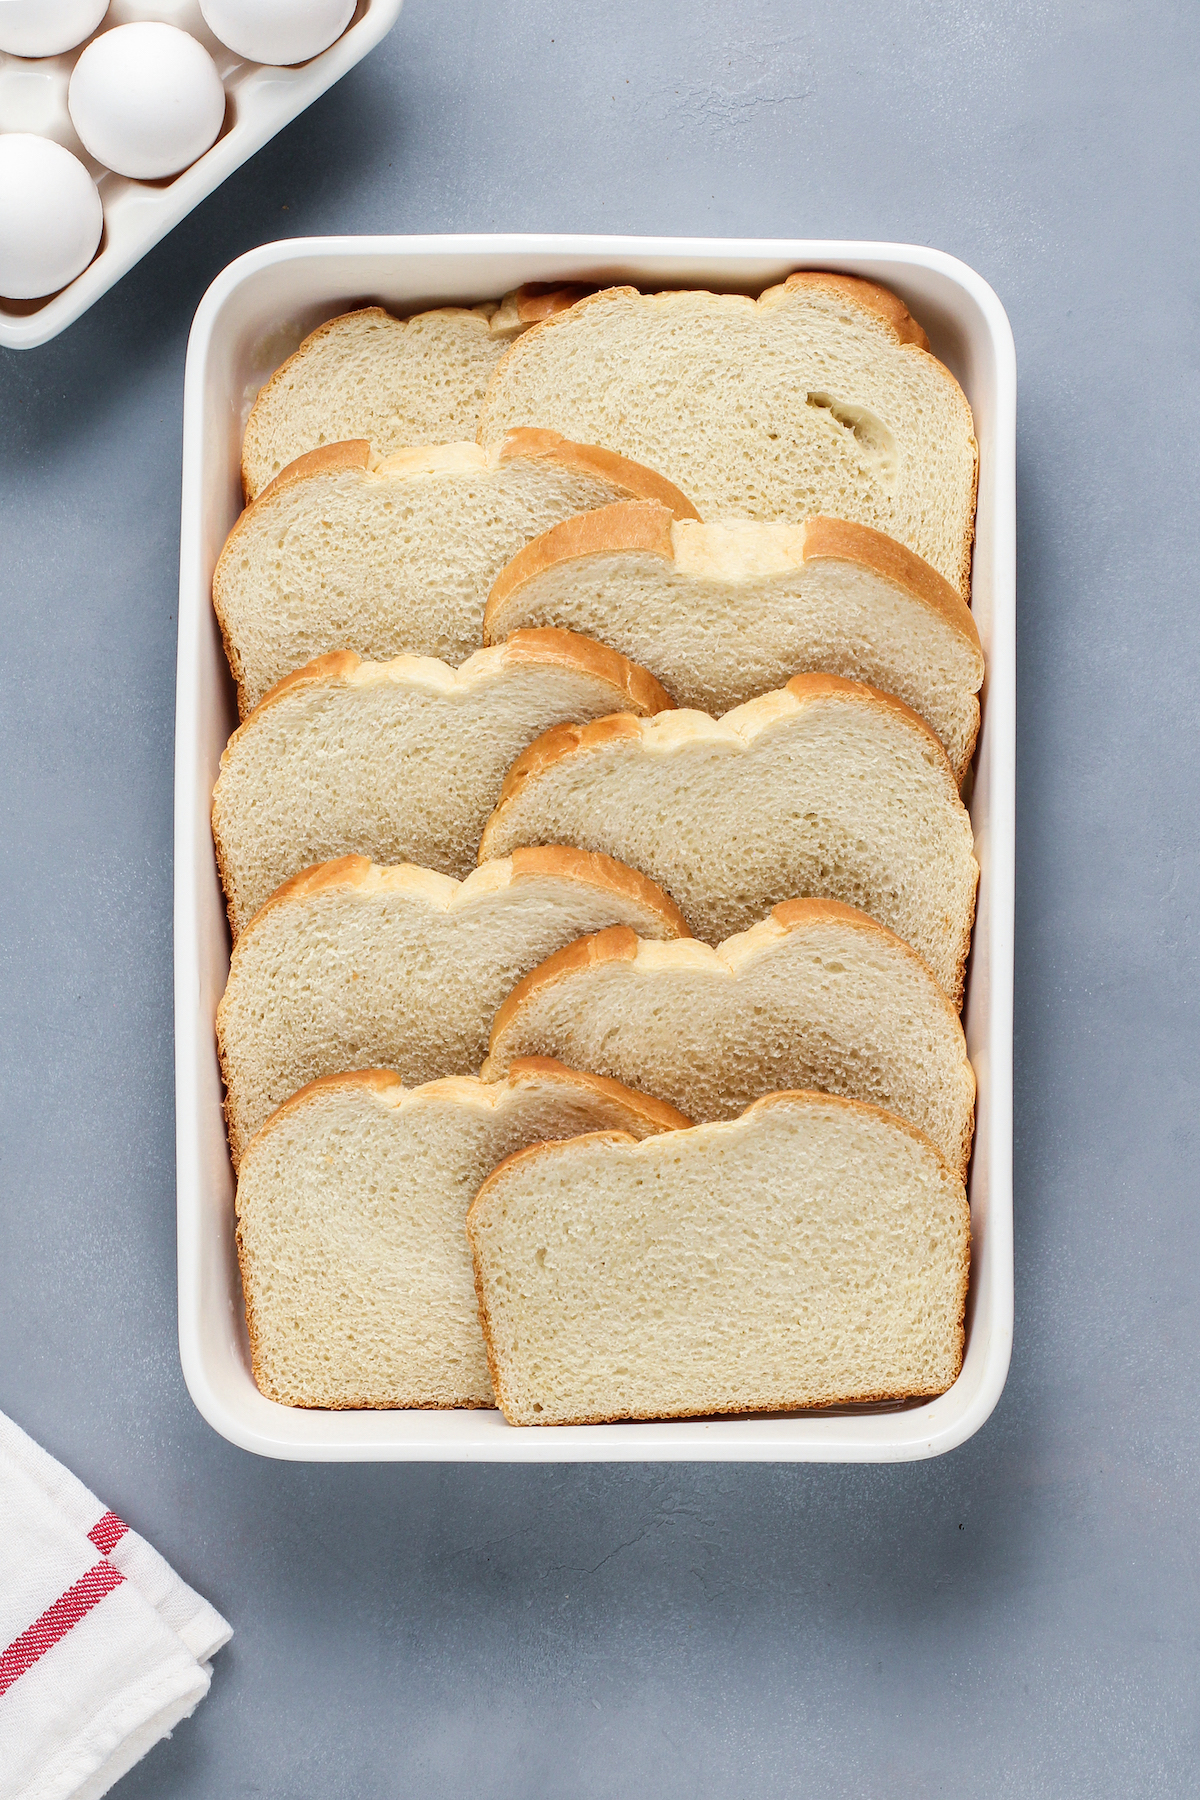 A large rectangular baking dish, filled with overlapping slices of bread.